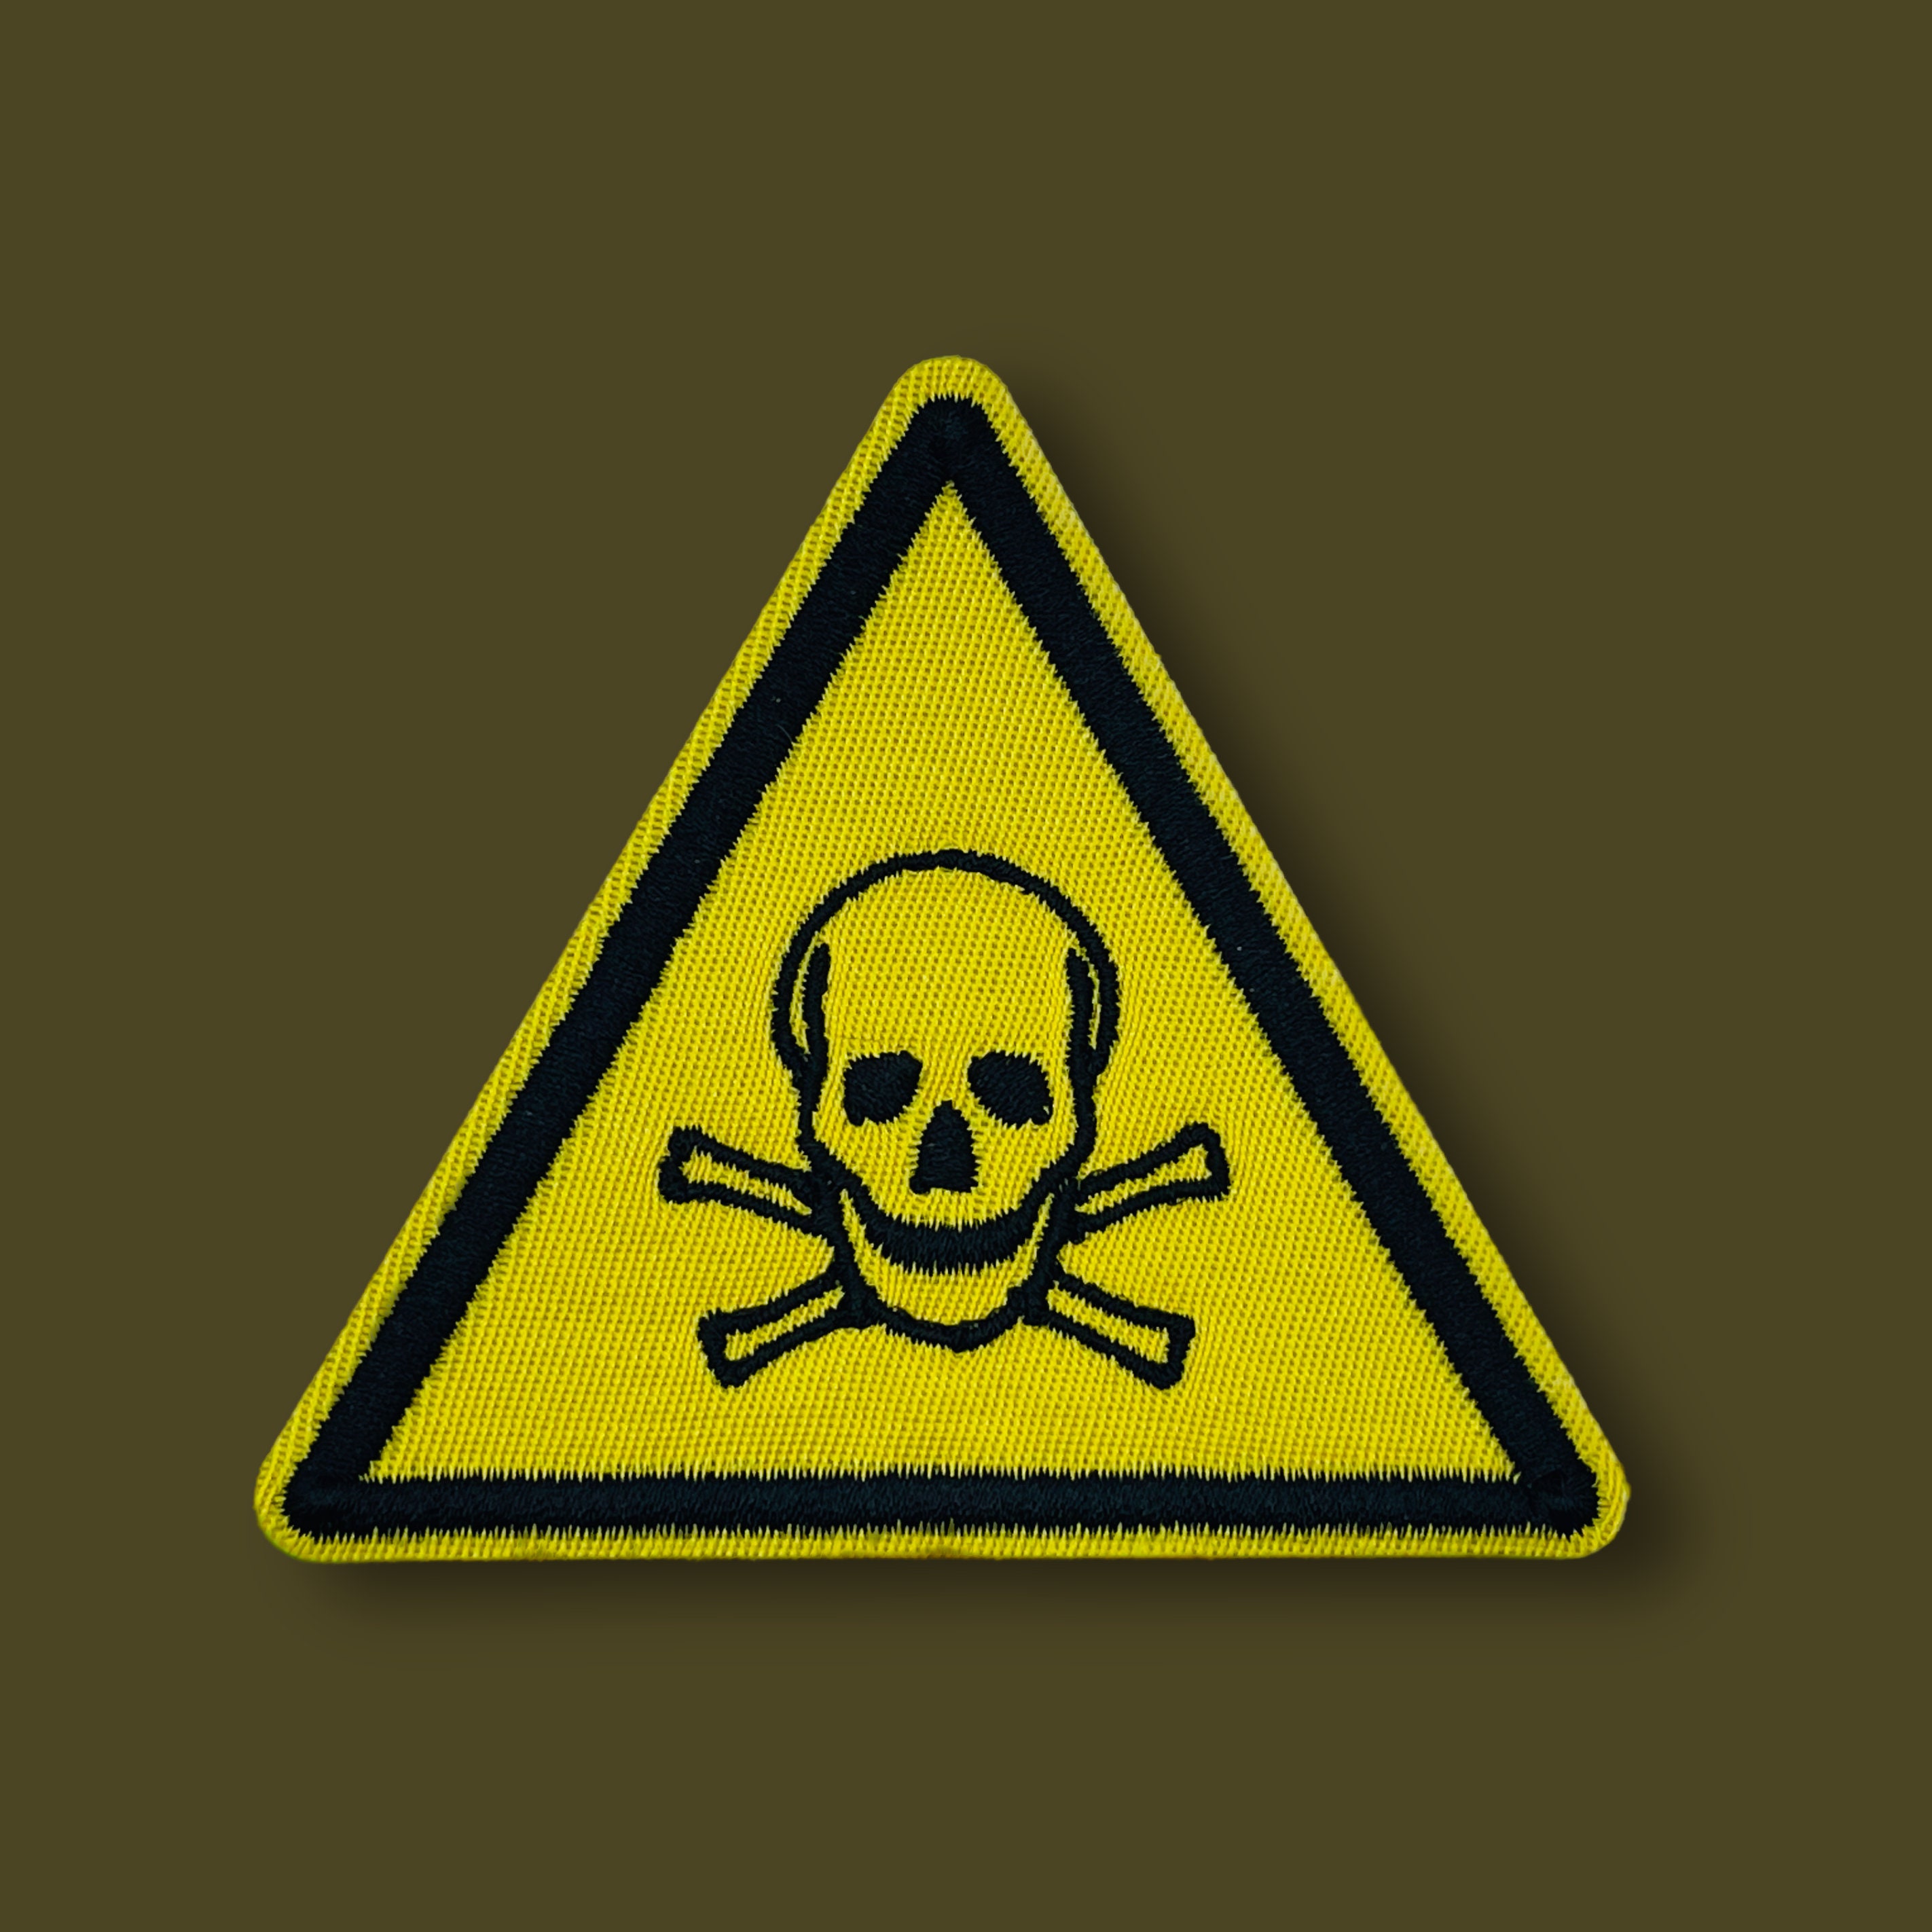 Toxic symbol with skull and crossbones on a yellow square